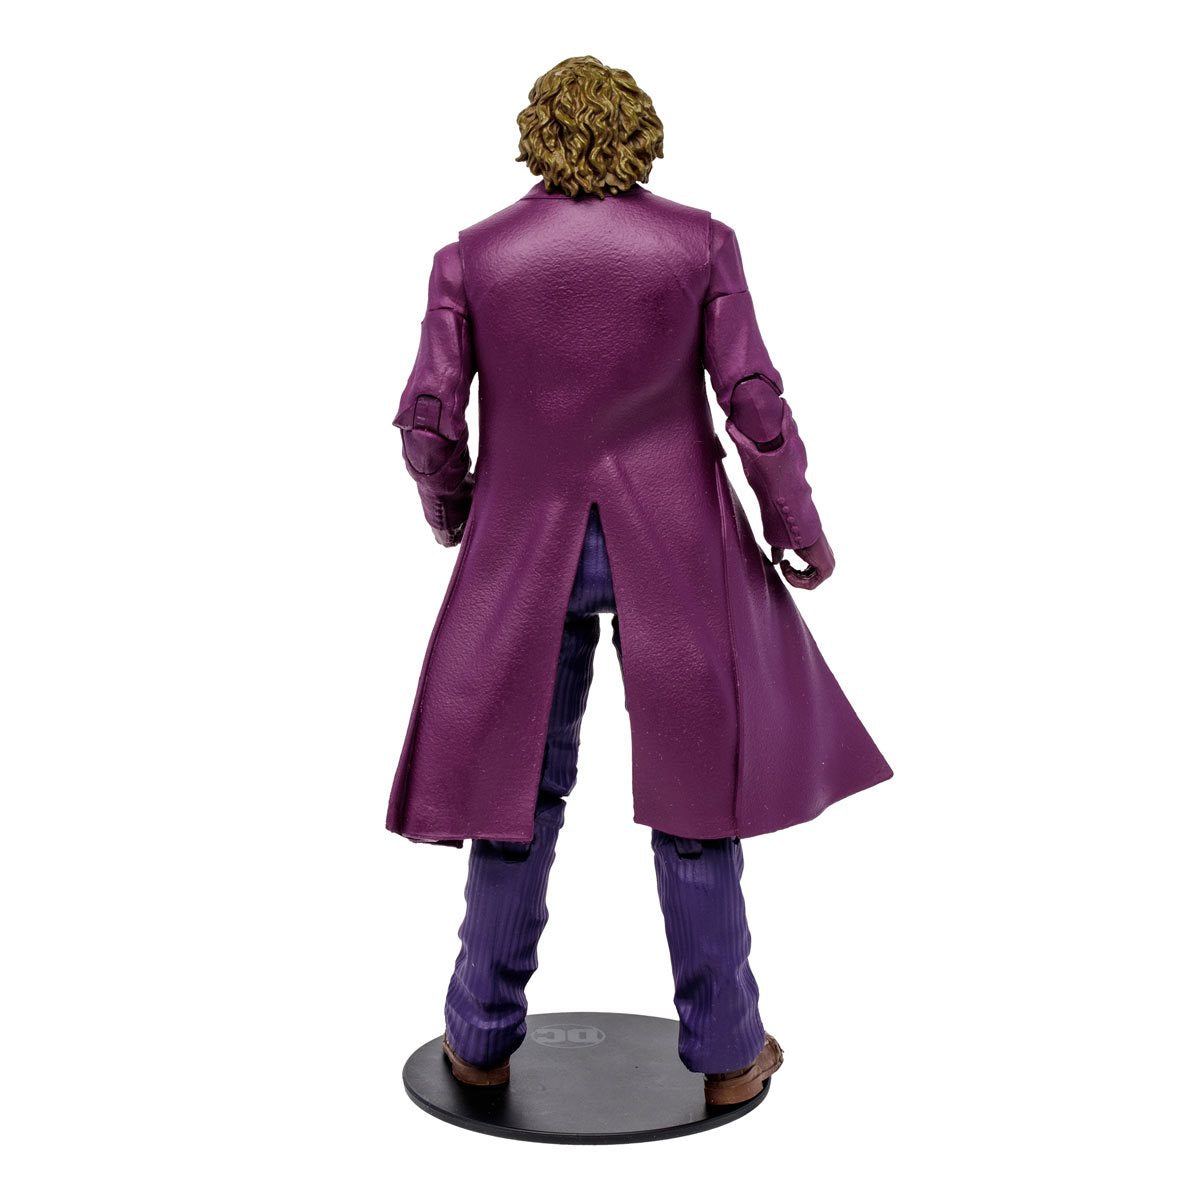 DC Multiverse The Joker Action Figure (The Dark Knight Trilogy) 7-Inch Build-A-Figure